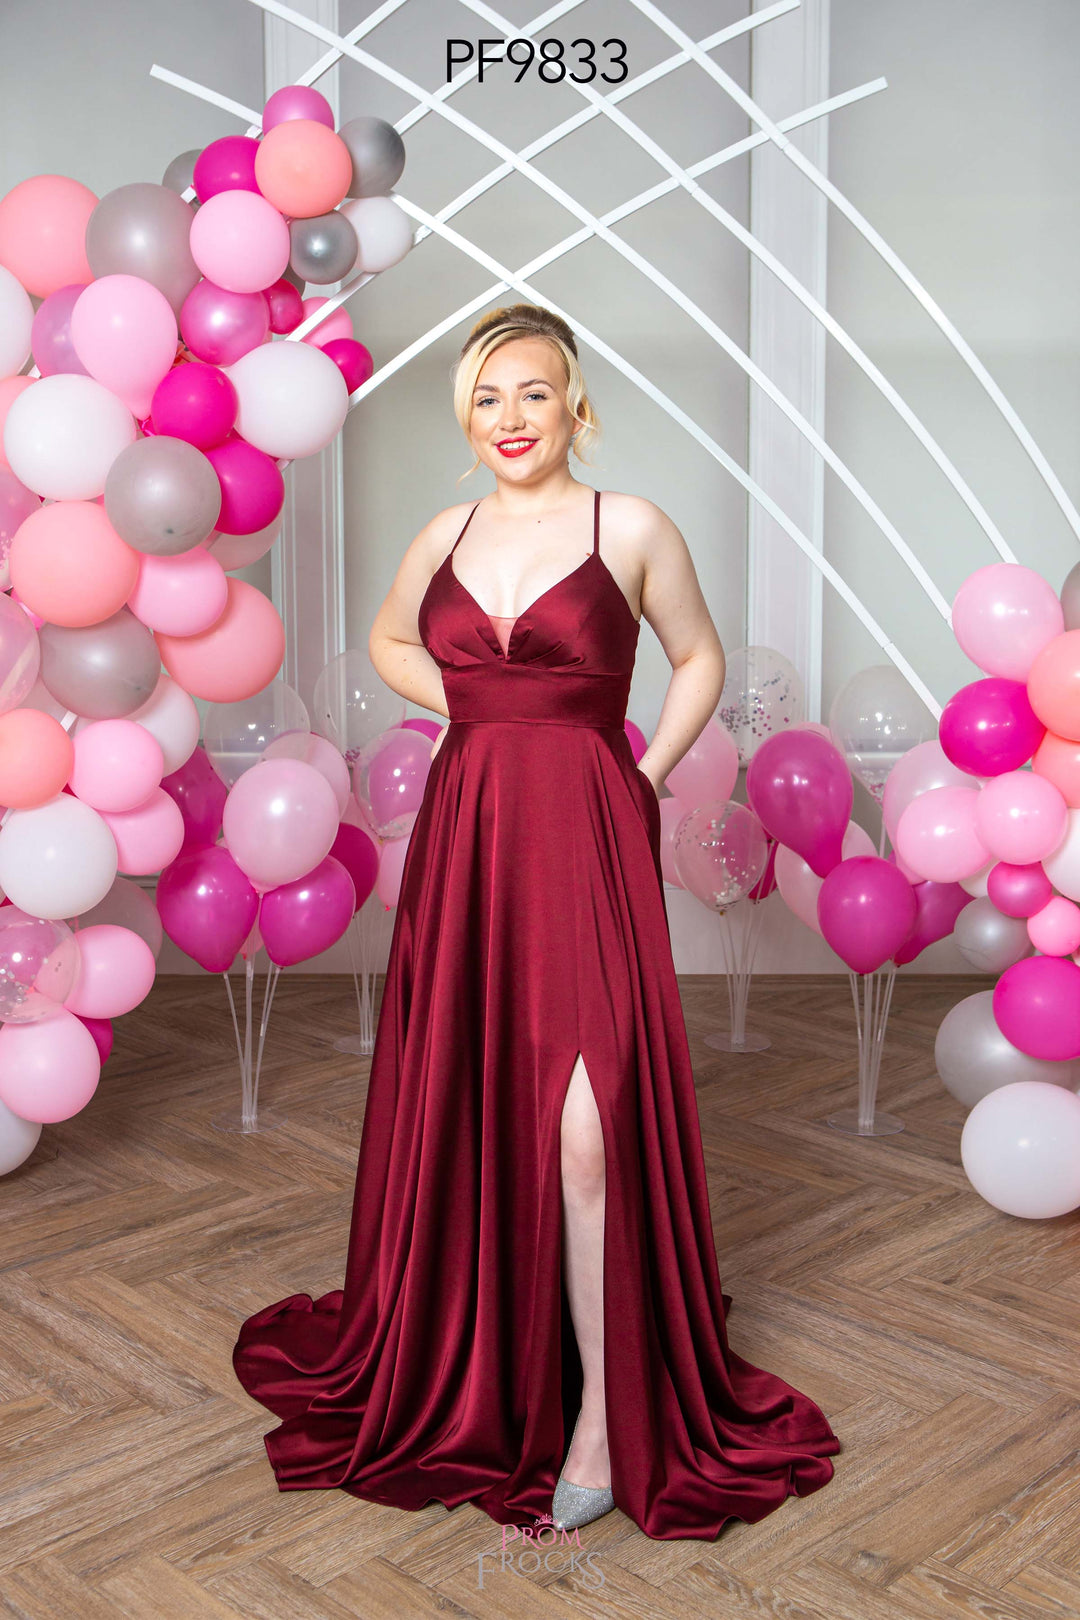 Prom Frocks PF9833 Prom Dress Dotique chesterfield best prom showroom  claret red